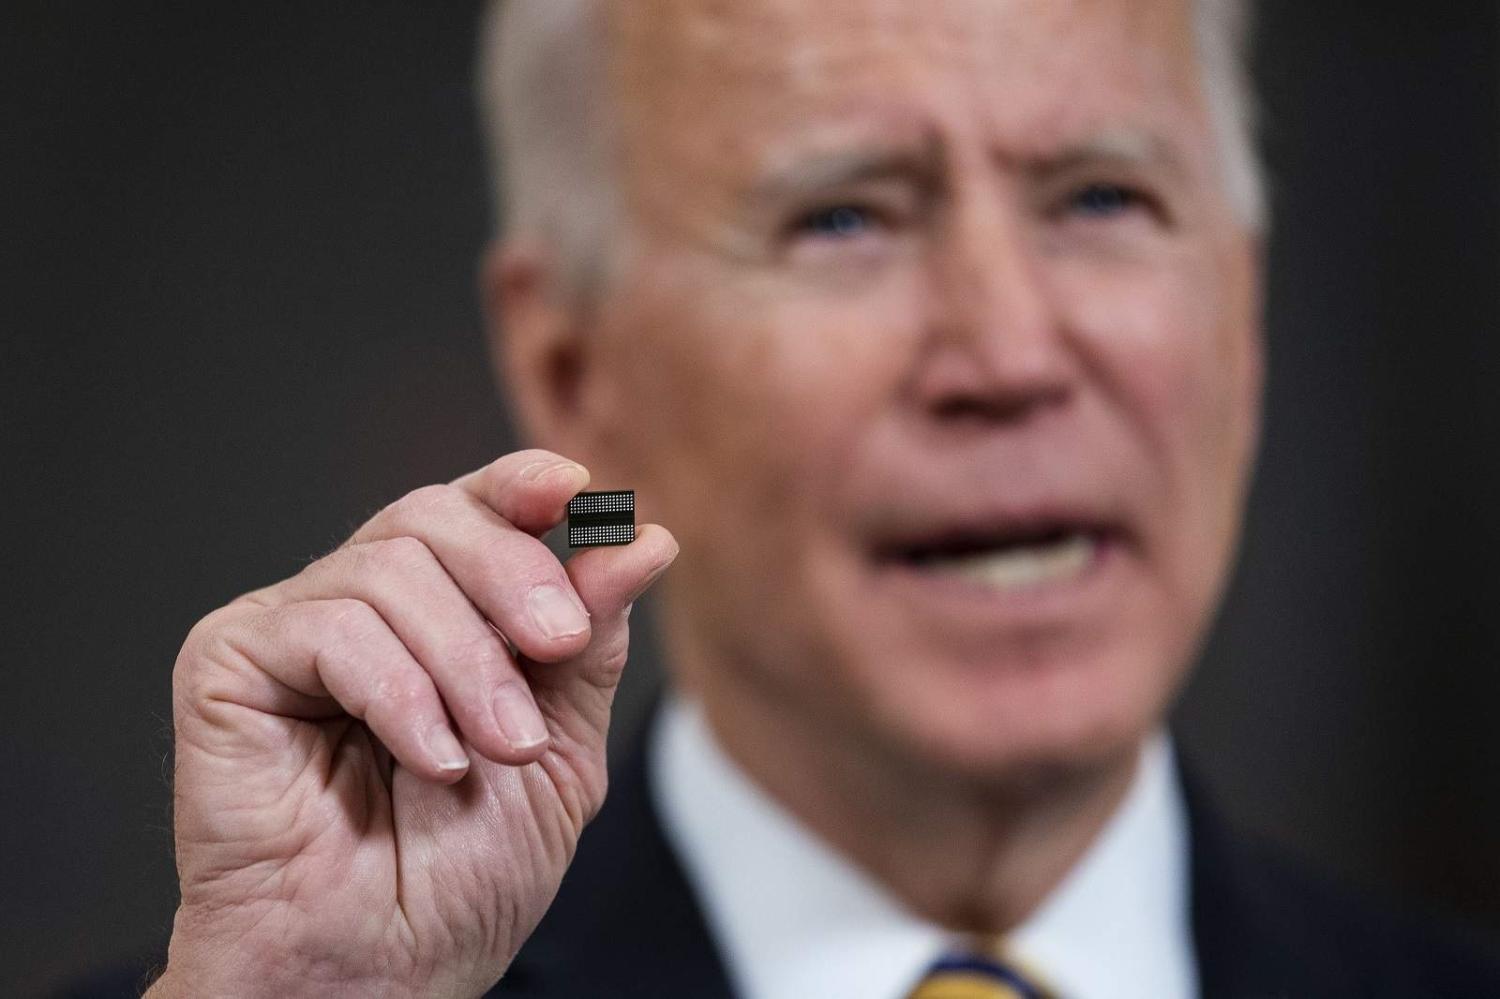 President Joe Biden holds a semiconductor during his remarks before signing an Executive Order on the economy at the White House, 24 February 2021 (Doug Mills/Pool/Getty Images)